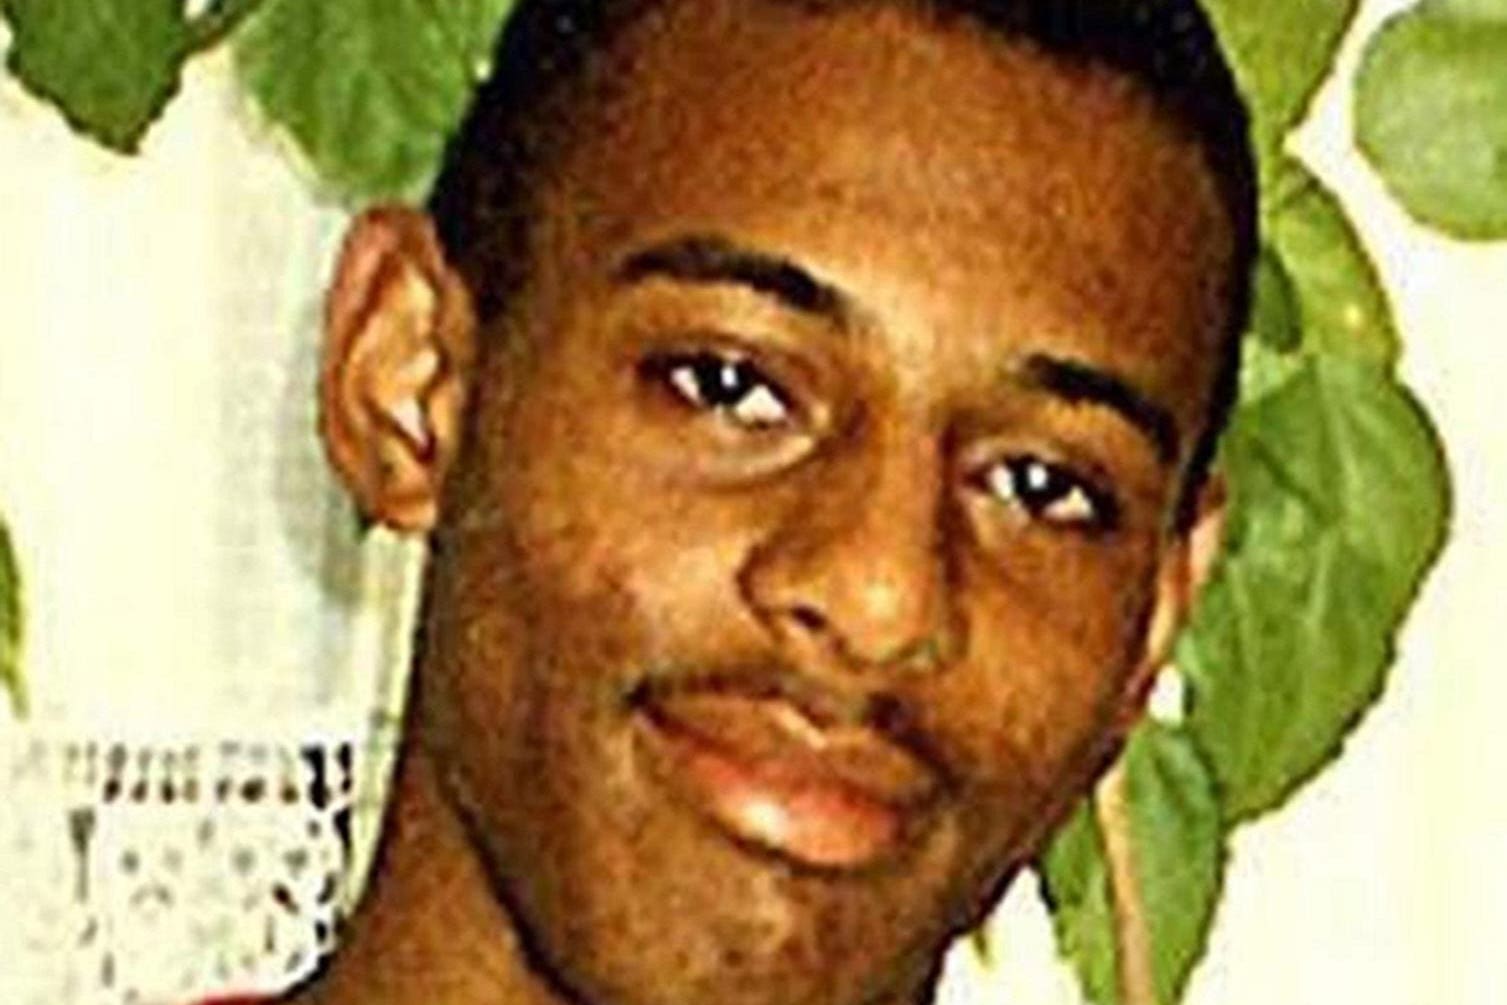 Stephen Lawrence was stabbed to death on April 22 1993